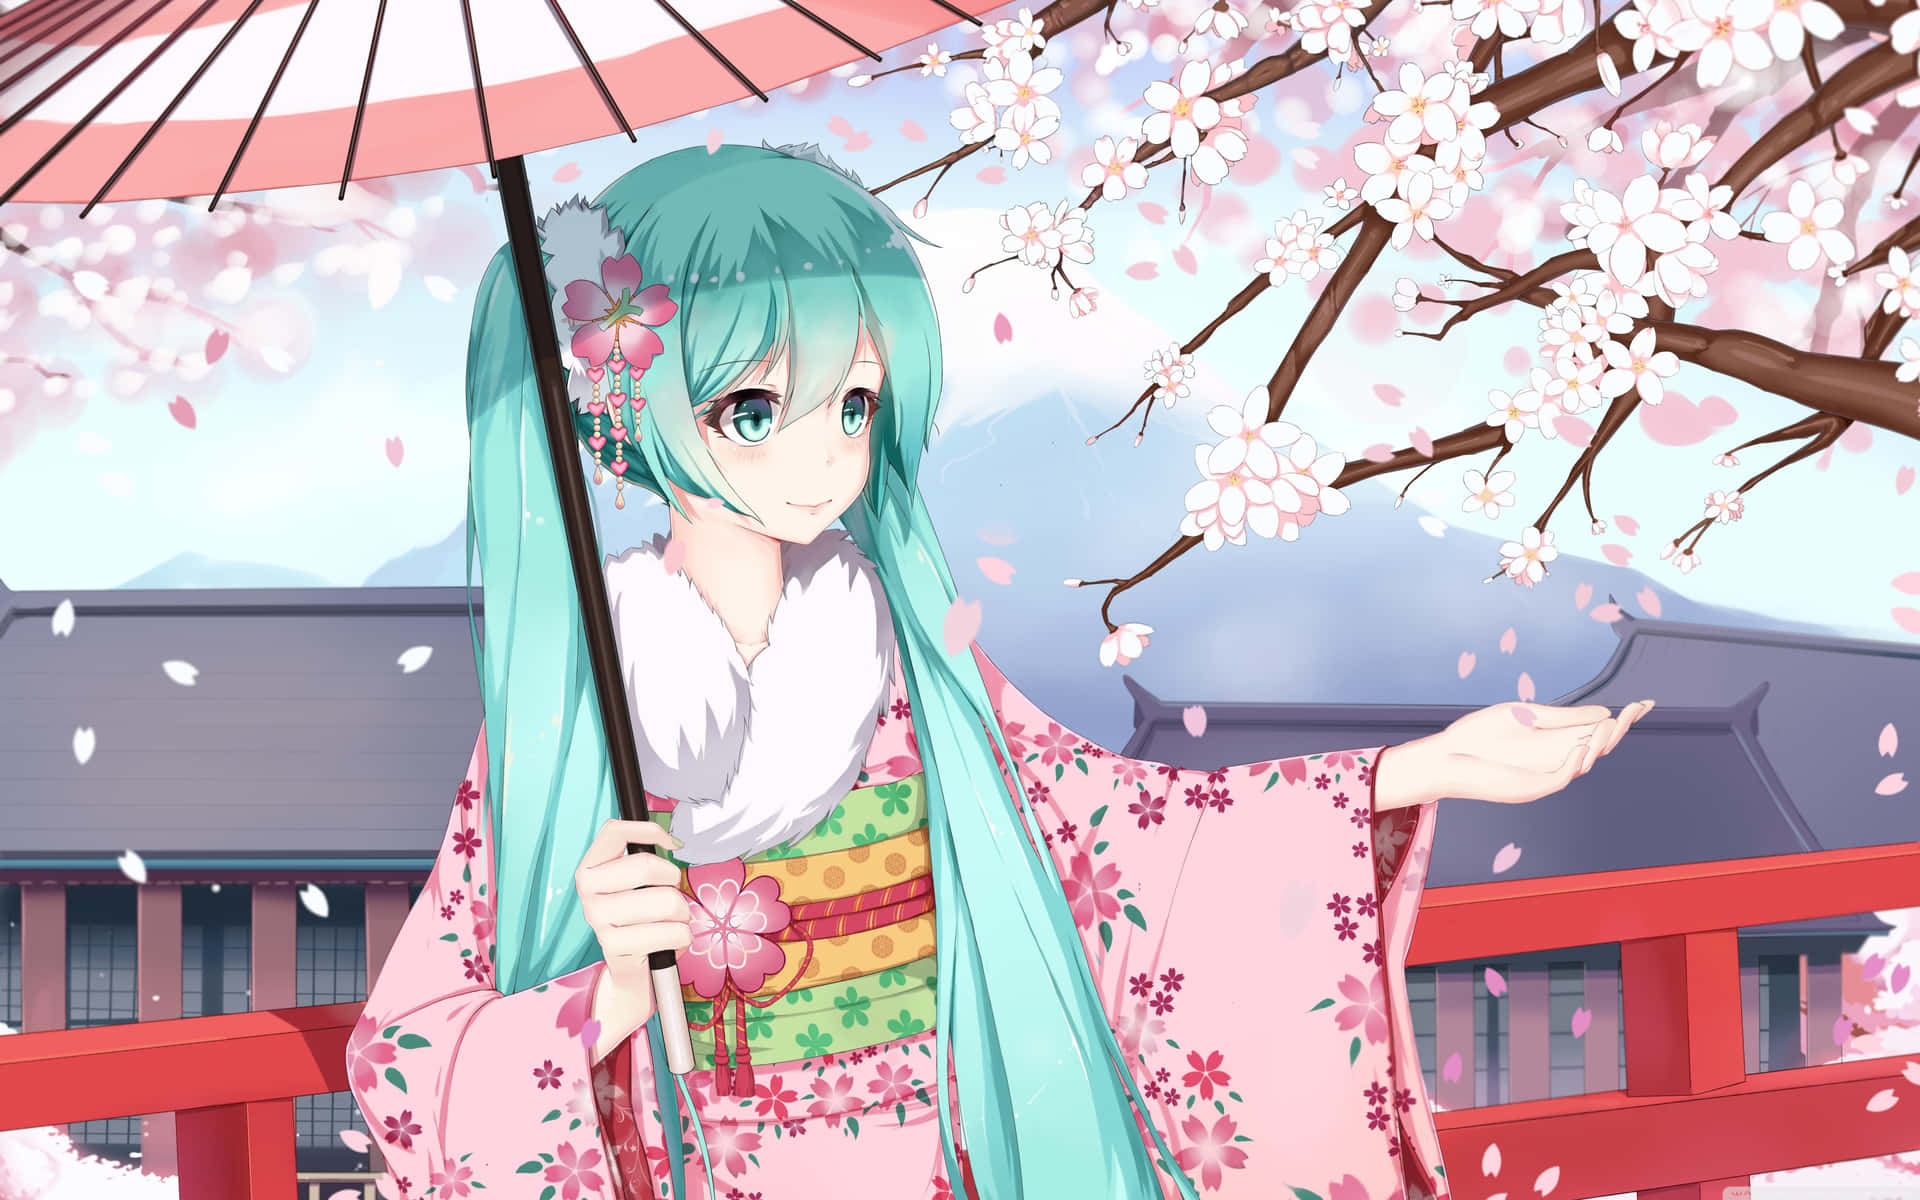 Sakura Miku emerges from a blossom of cherry trees Wallpaper